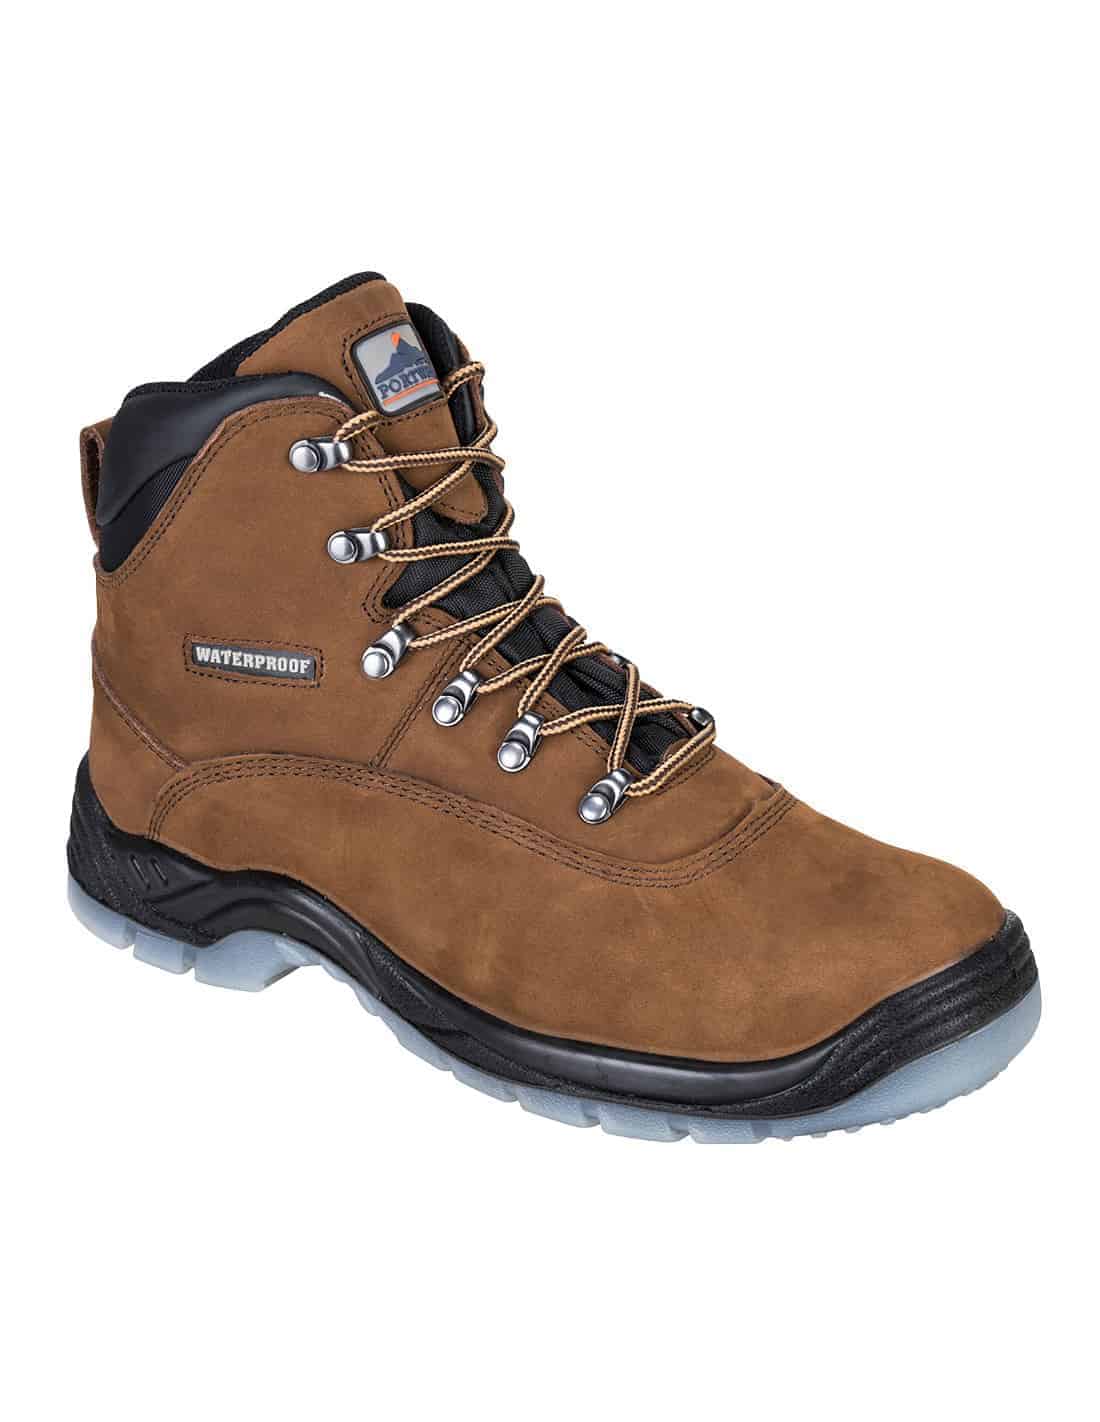 S3W all weather membrane boot -10° C.